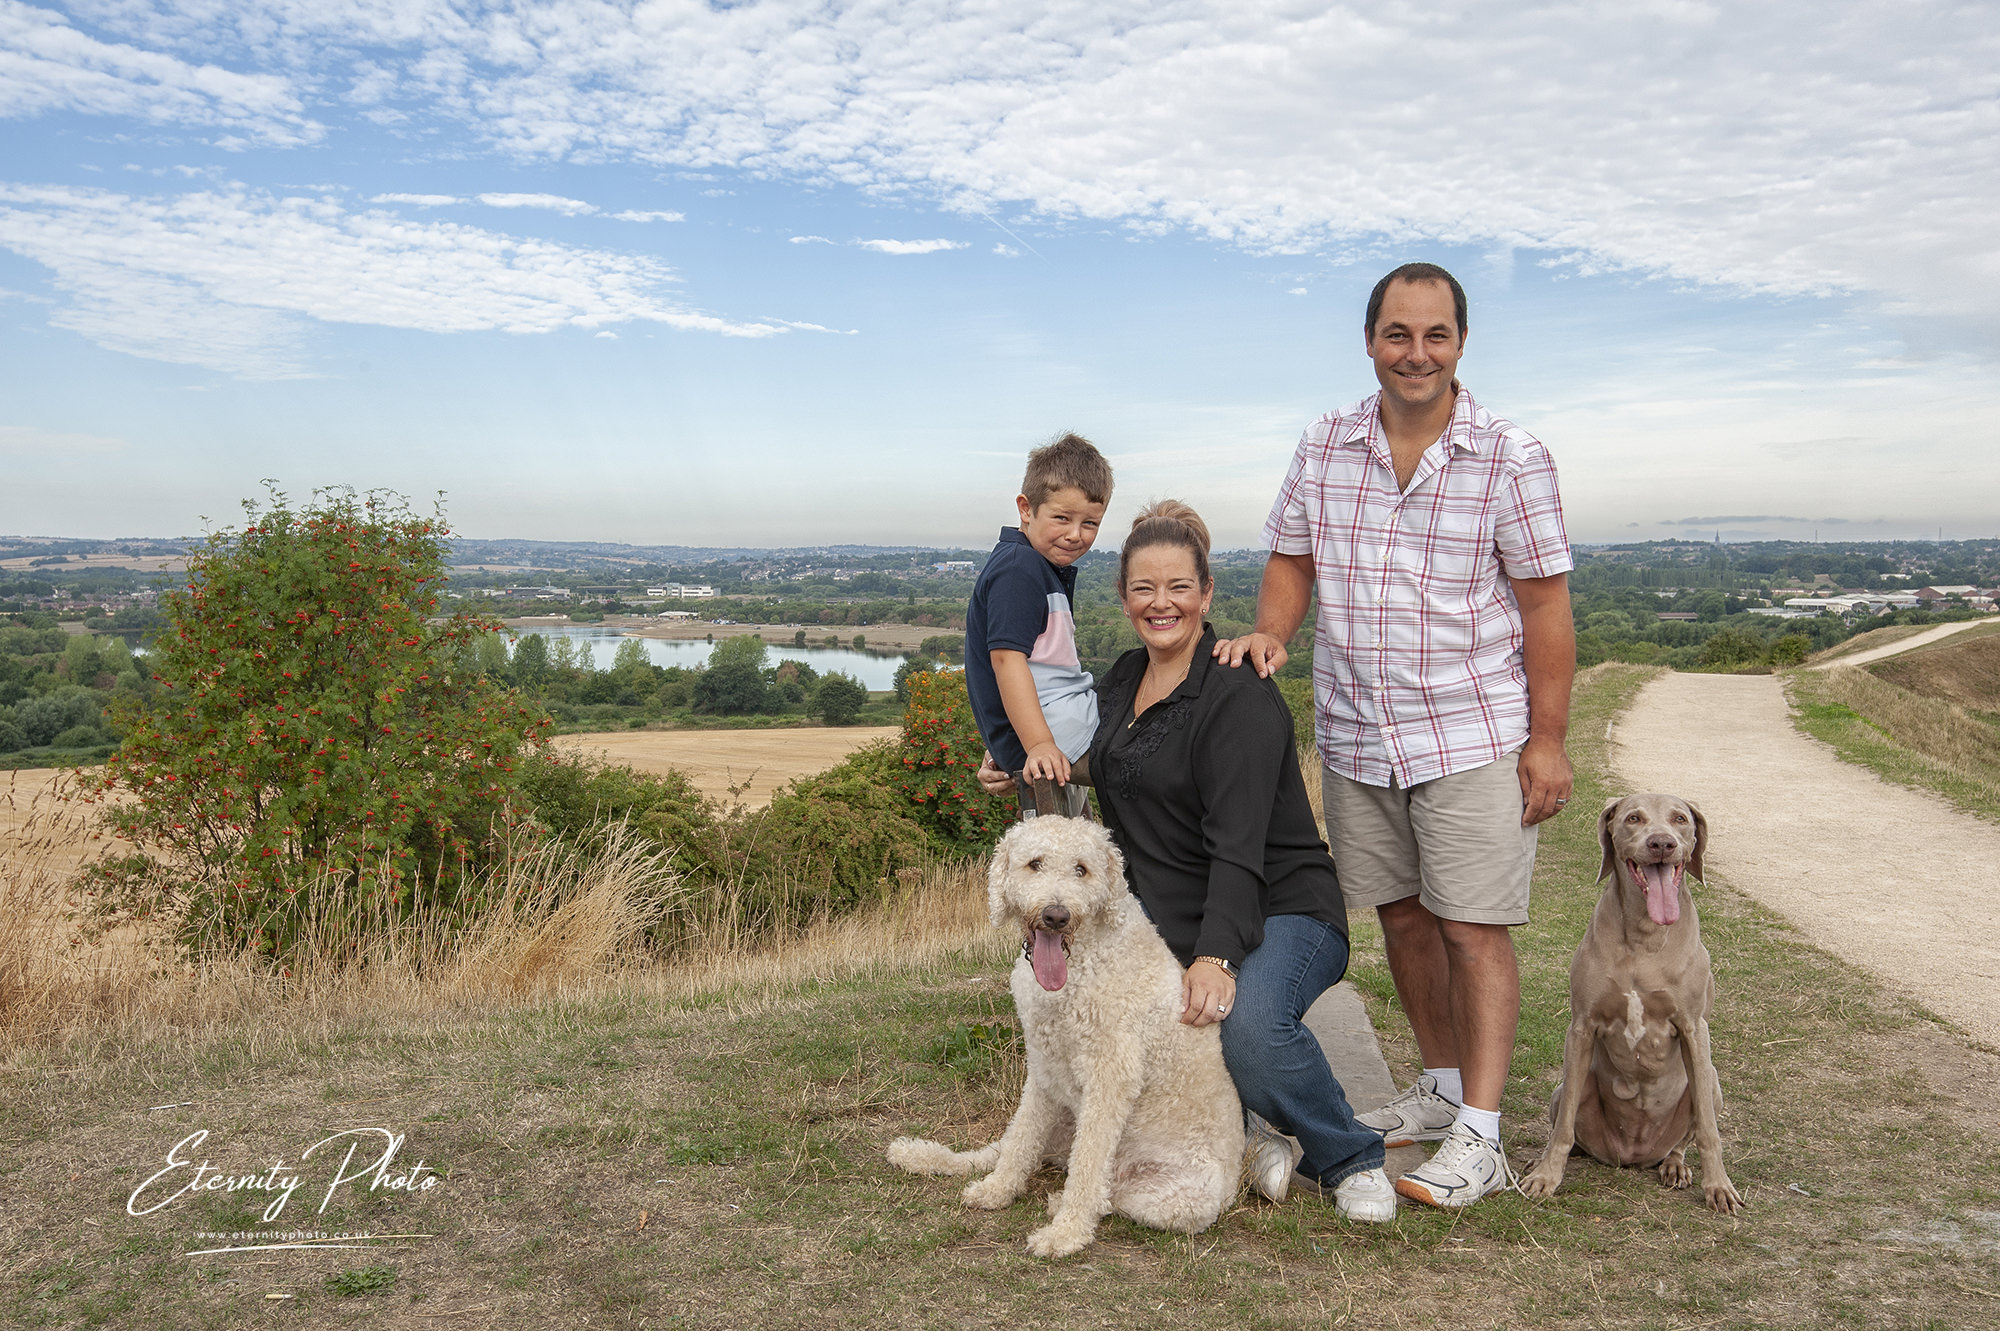 Family and dogs enjoying countryside panorama.